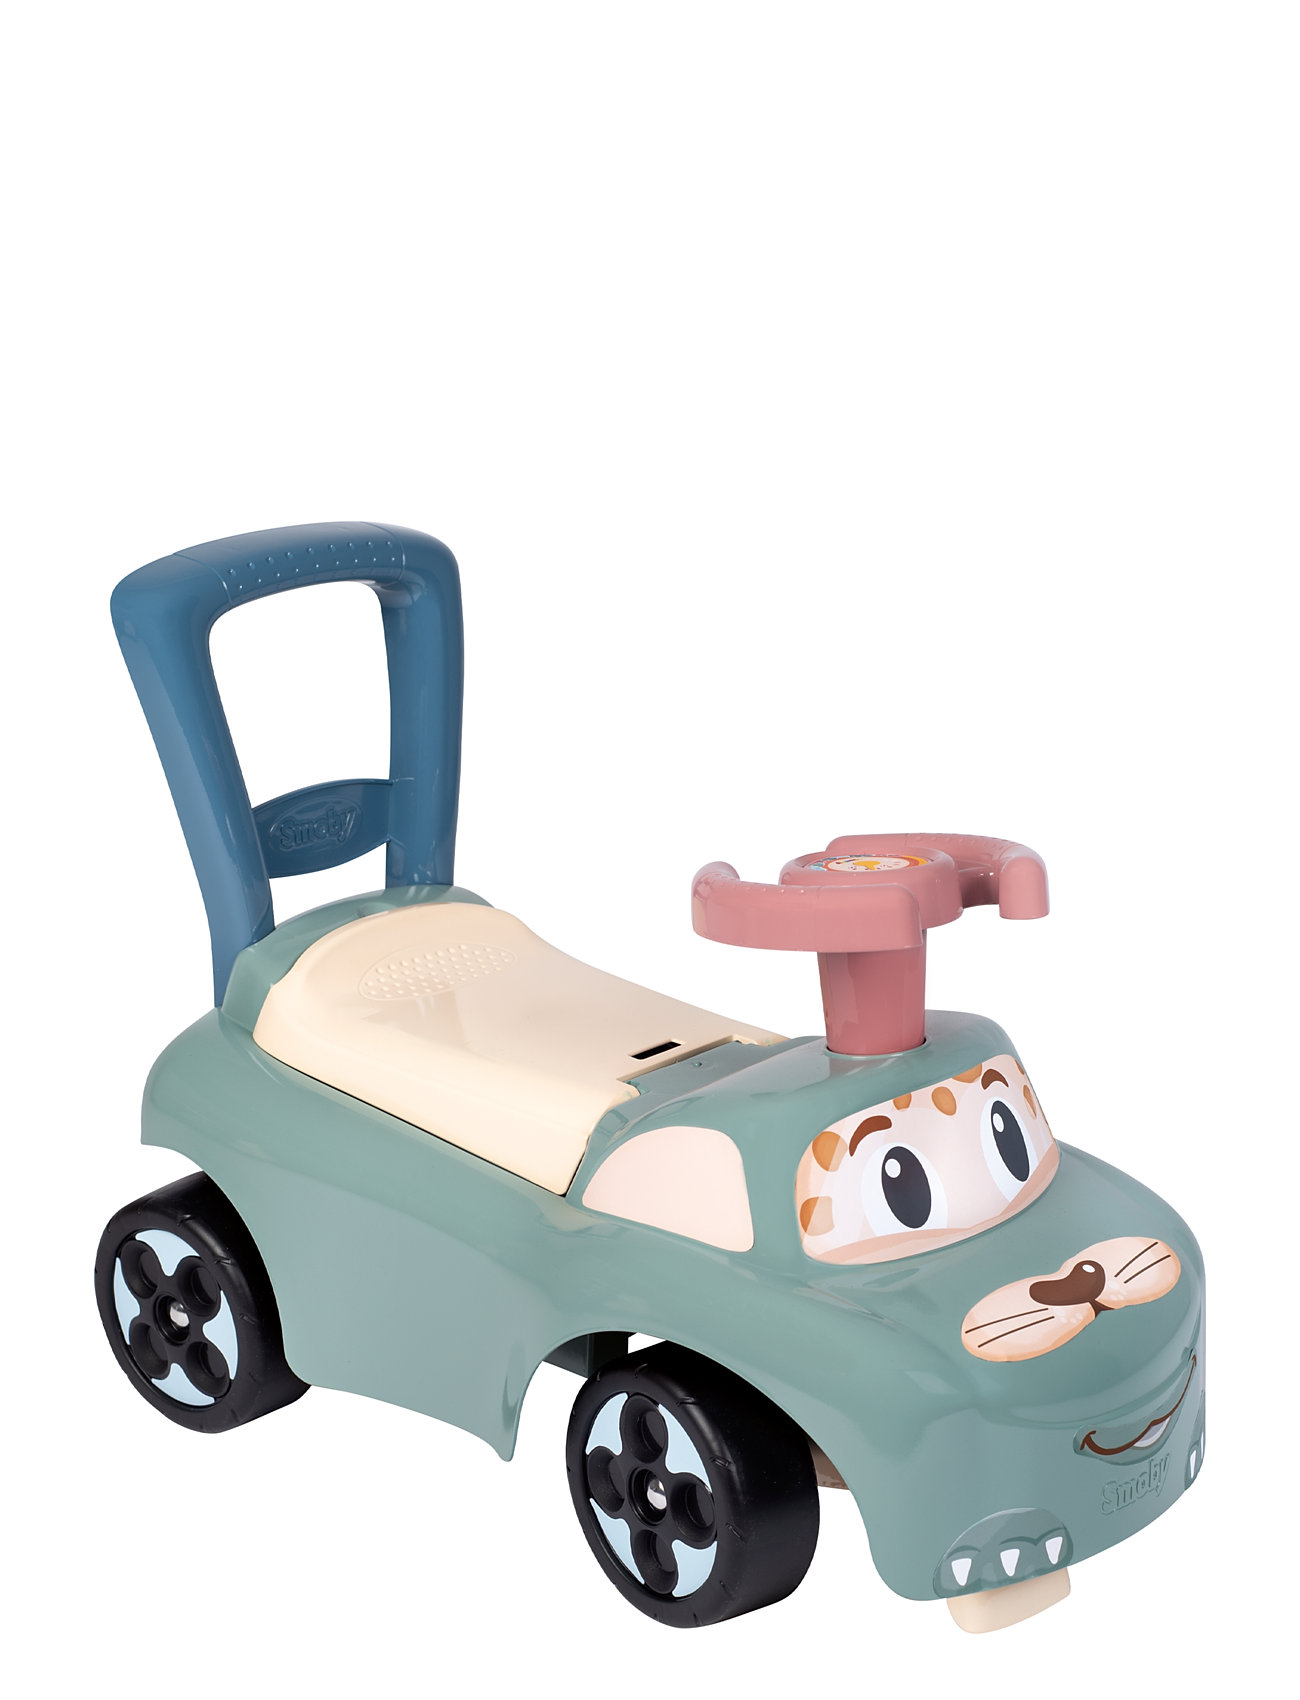 Little Smoby Auto Ride-On Toys Ride On Toys Multi/patterned Smoby